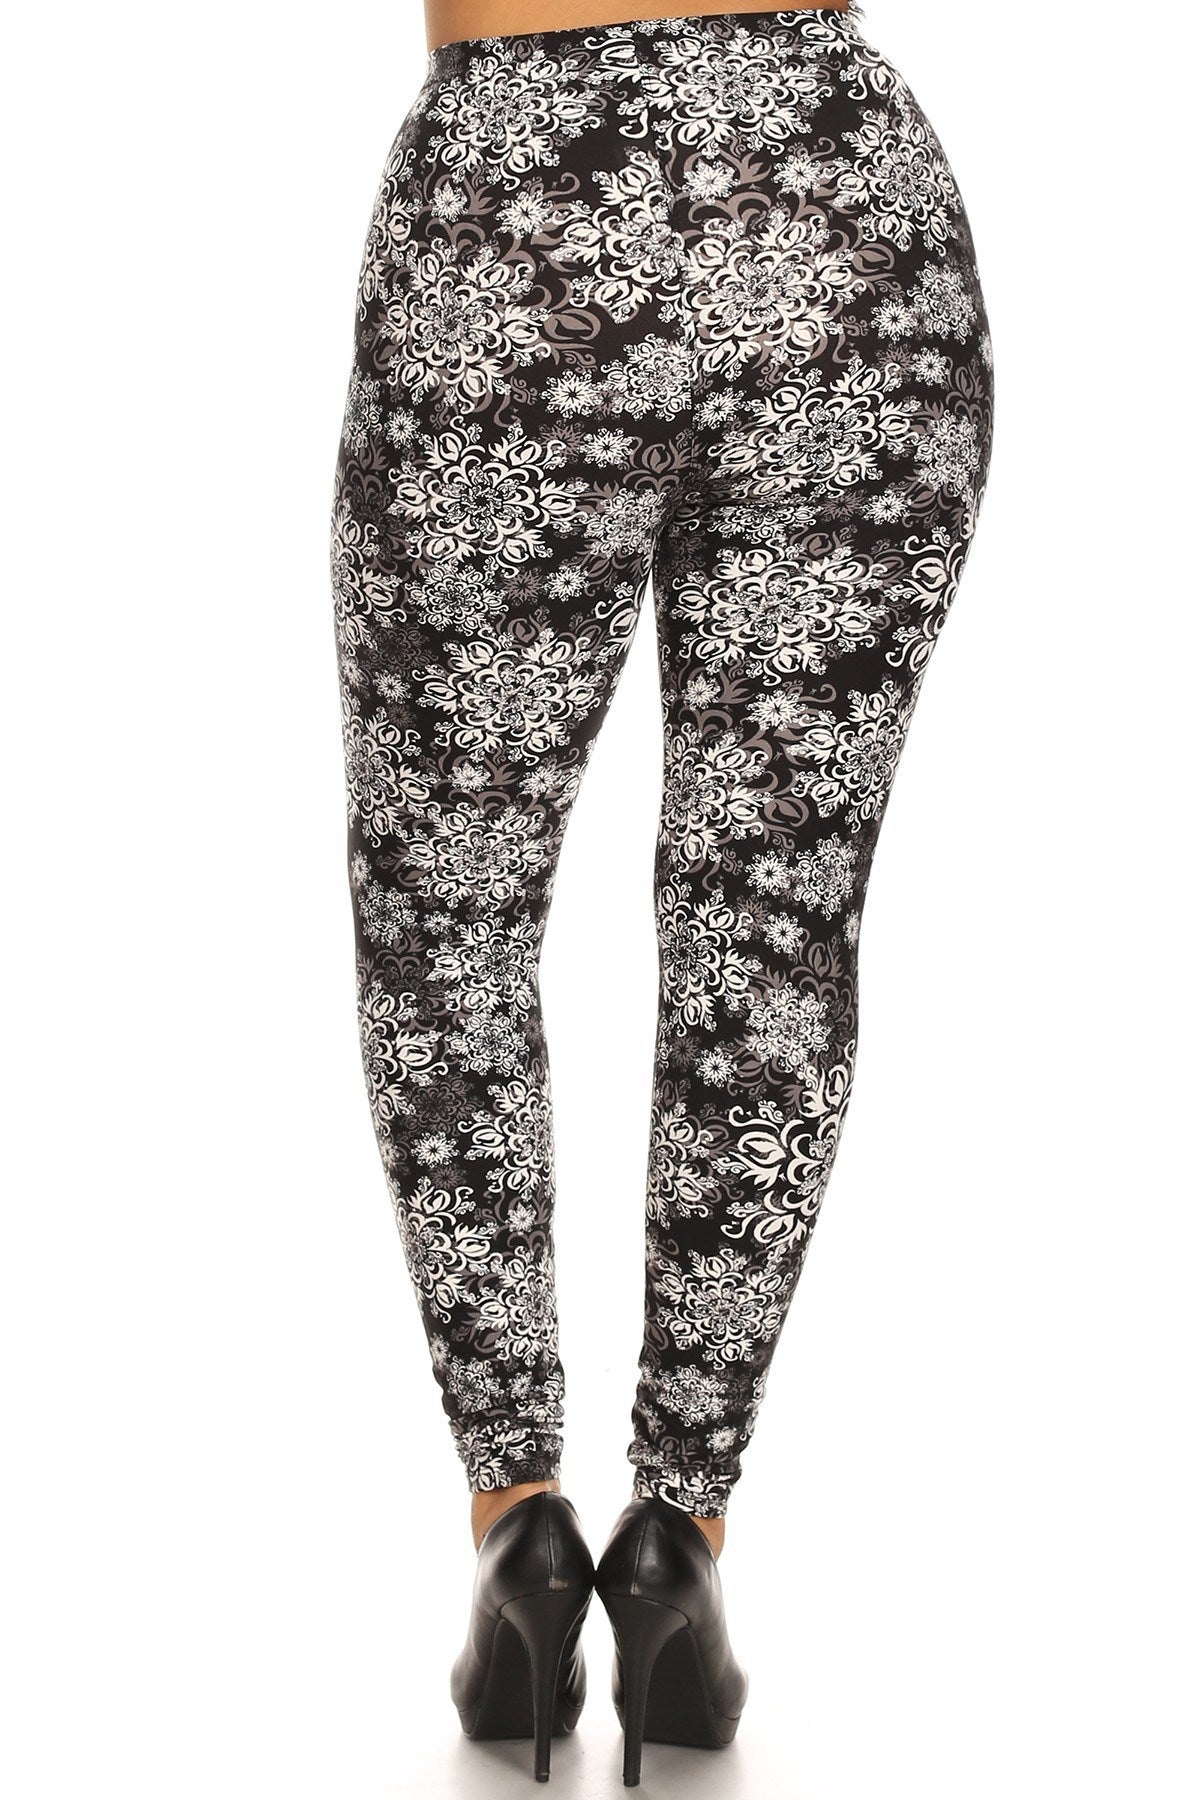 Plus Size Abstract Print, Full Length Leggings In A Slim Fitting Style With A Banded High Waist - Fashion Quality Boutik